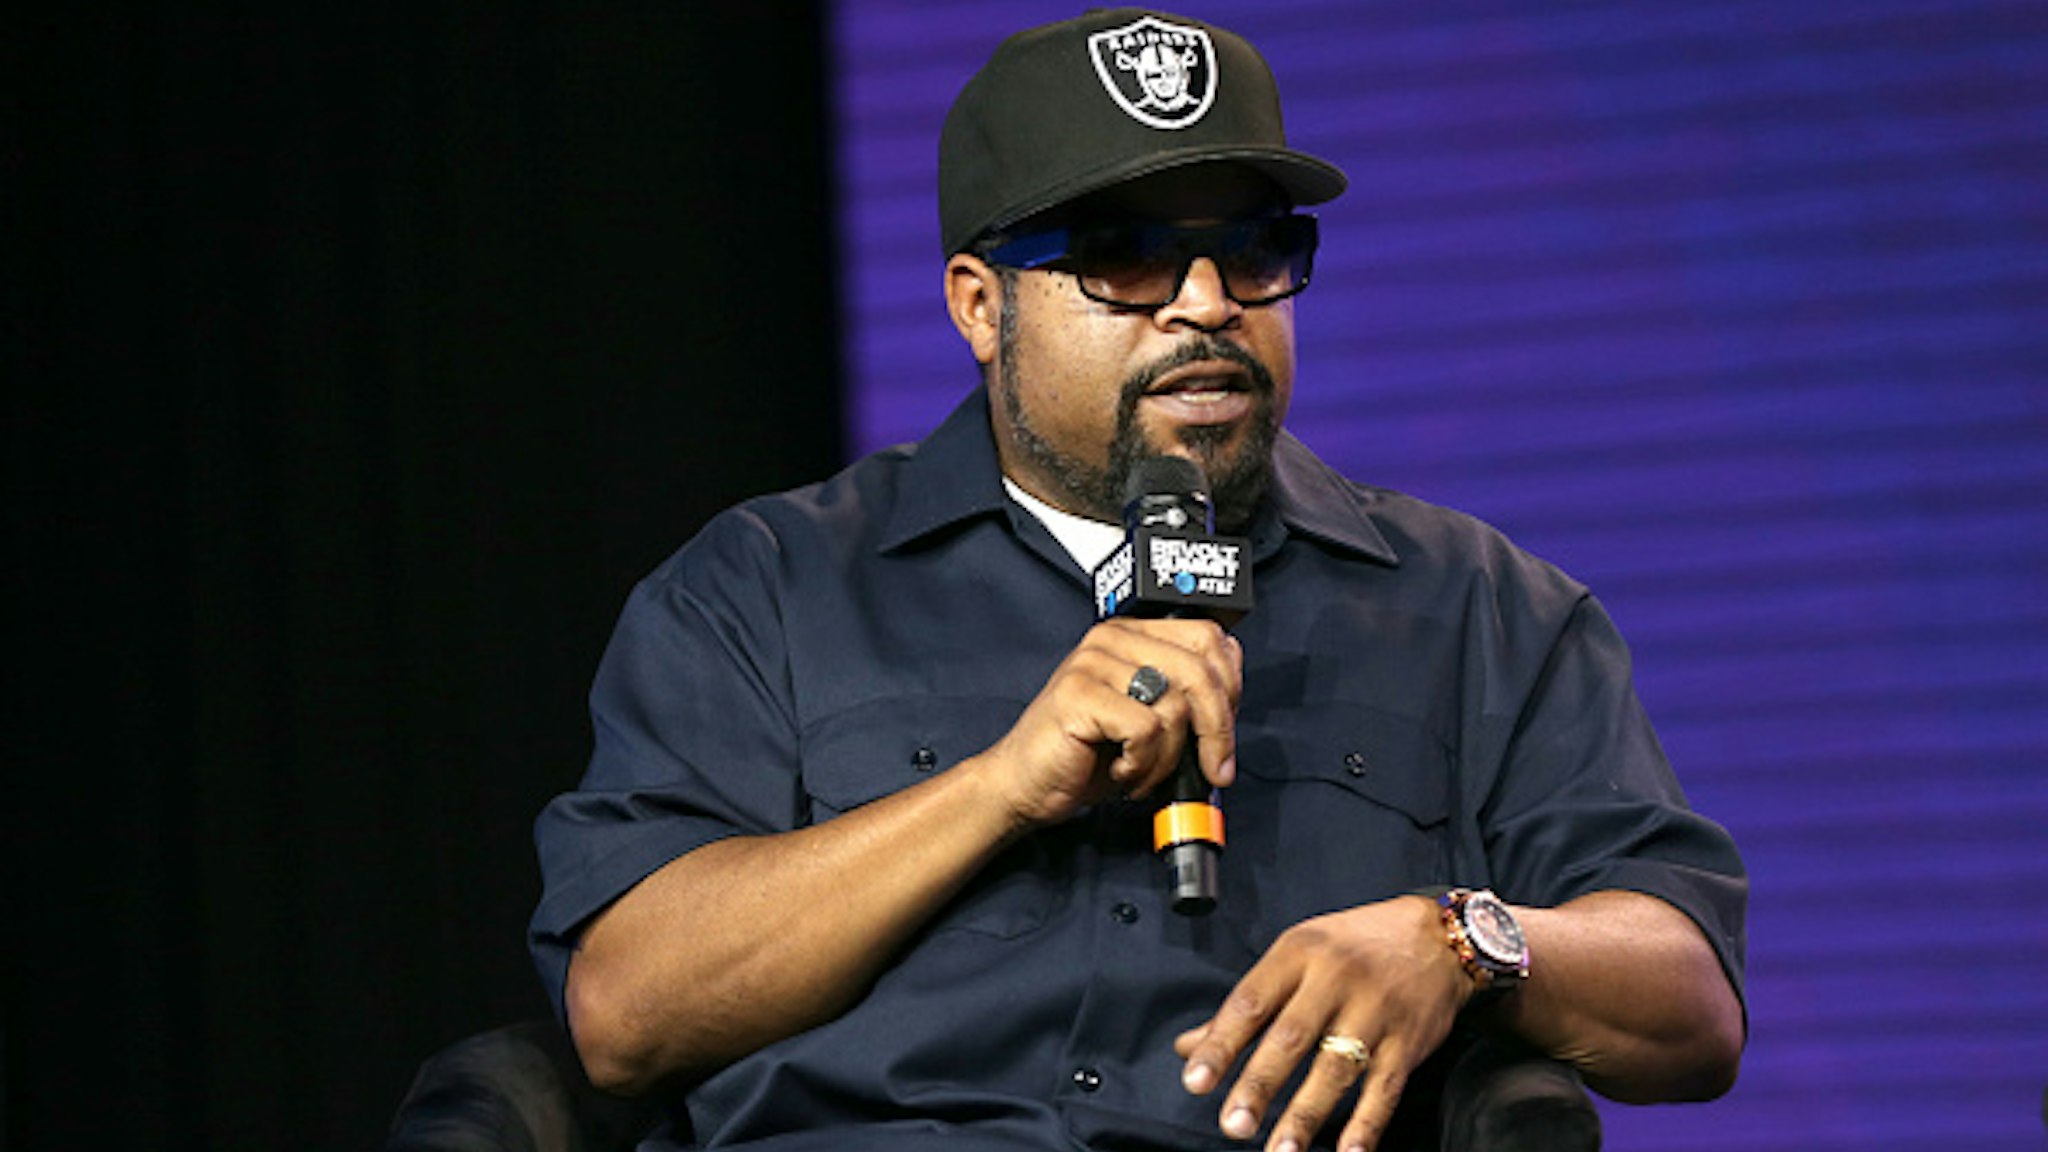 LOS ANGELES, CALIFORNIA - OCTOBER 27: Ice Cube speaks onstage during the REVOLT X AT&amp;T Host REVOLT Summit In Los Angeles at Magic Box on October 27, 2019 in Los Angeles, California.